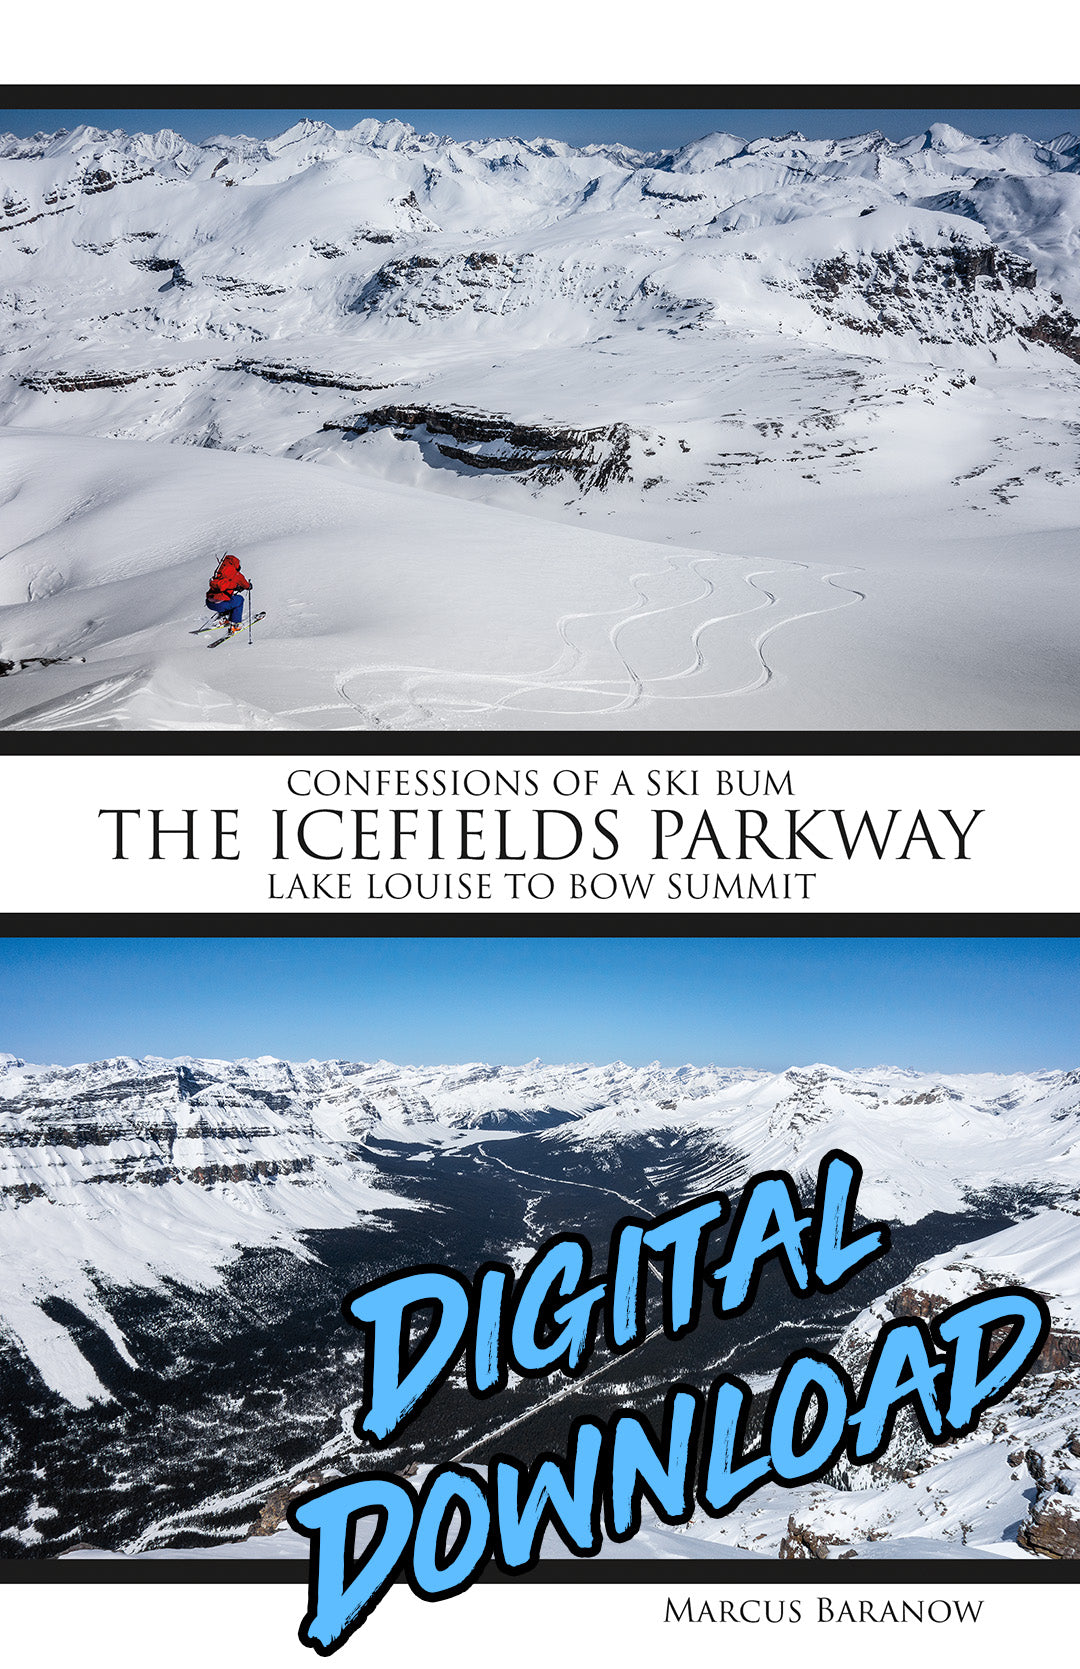 The Icefield Parkway : Digital Download Donation